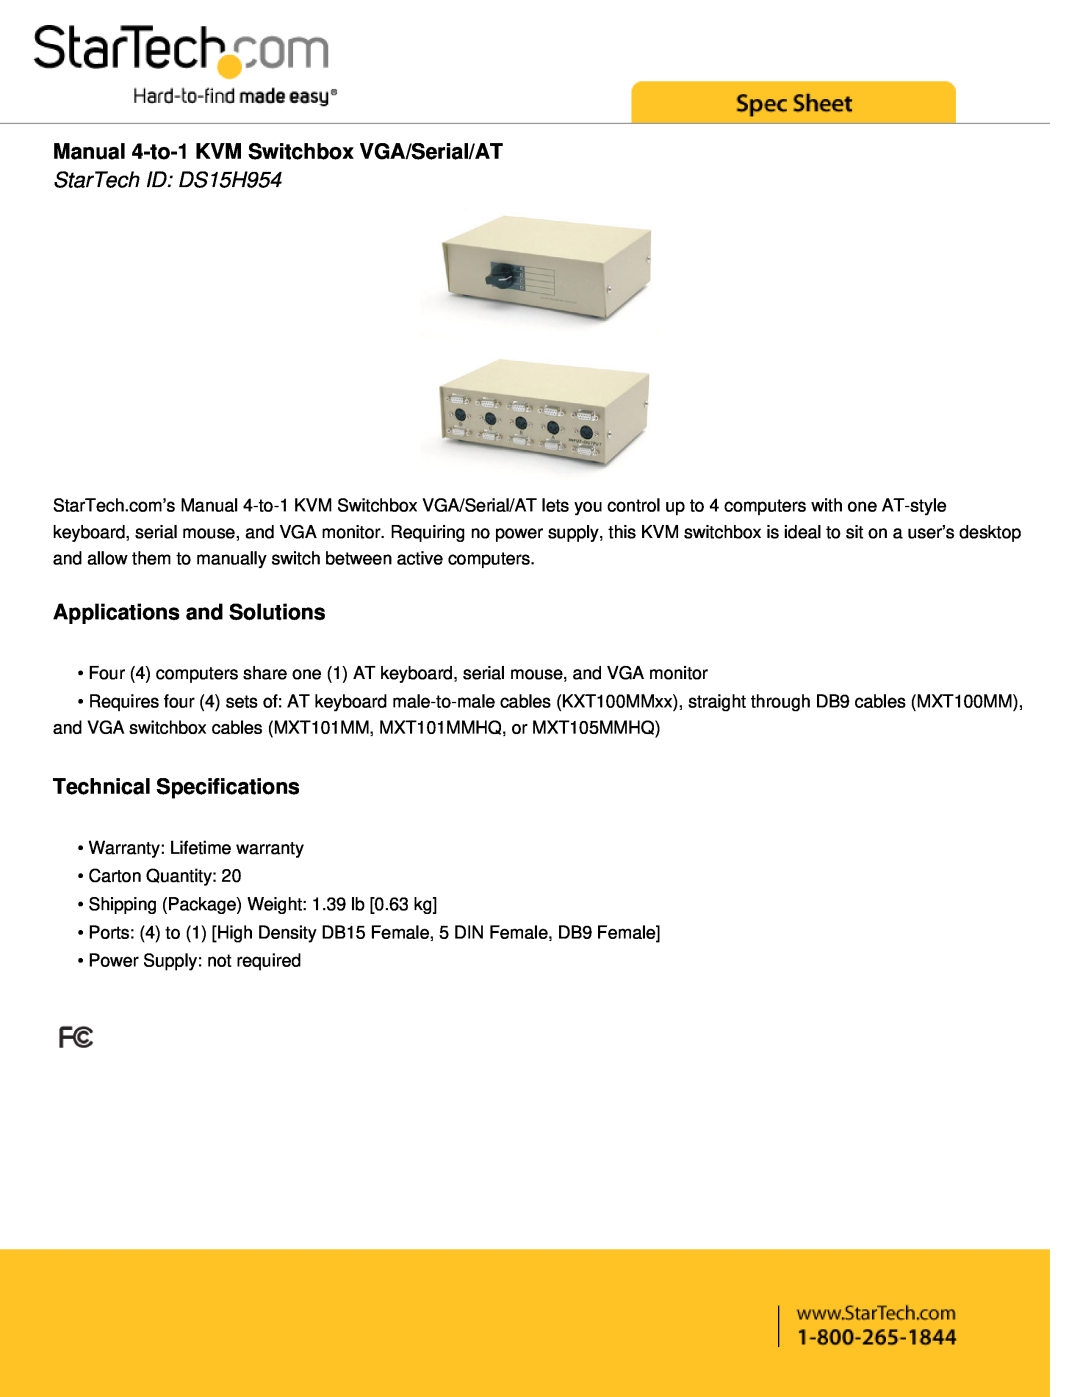 StarTech.com technical specifications Manual 4-to-1 KVM Switchbox VGA/Serial/AT, StarTech ID DS15H954 